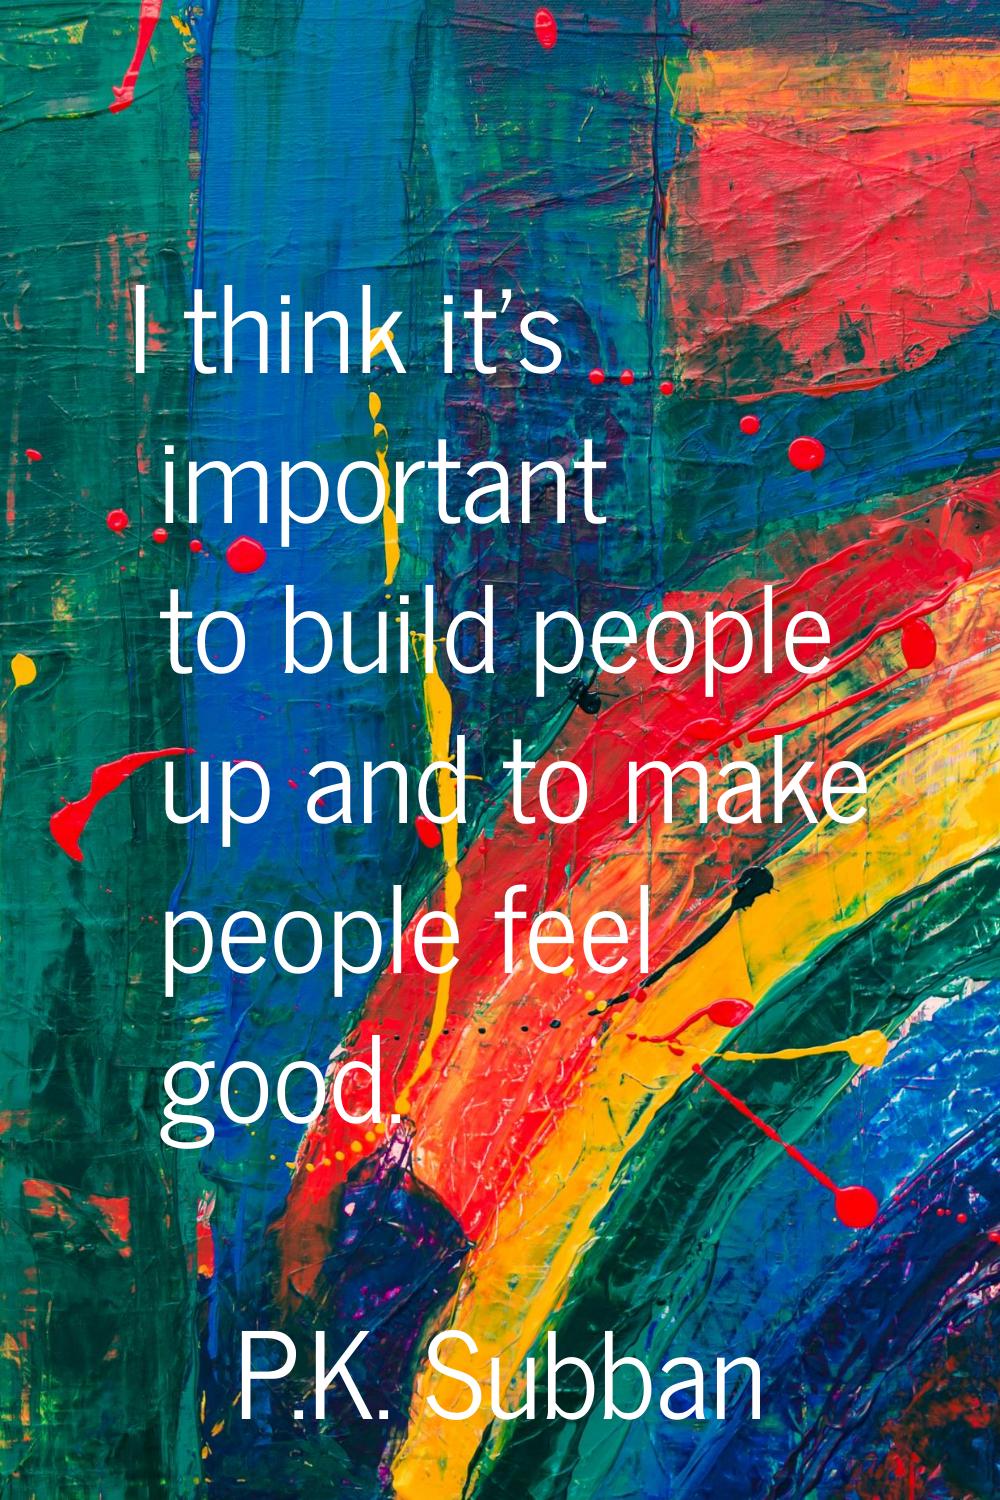 I think it's important to build people up and to make people feel good.